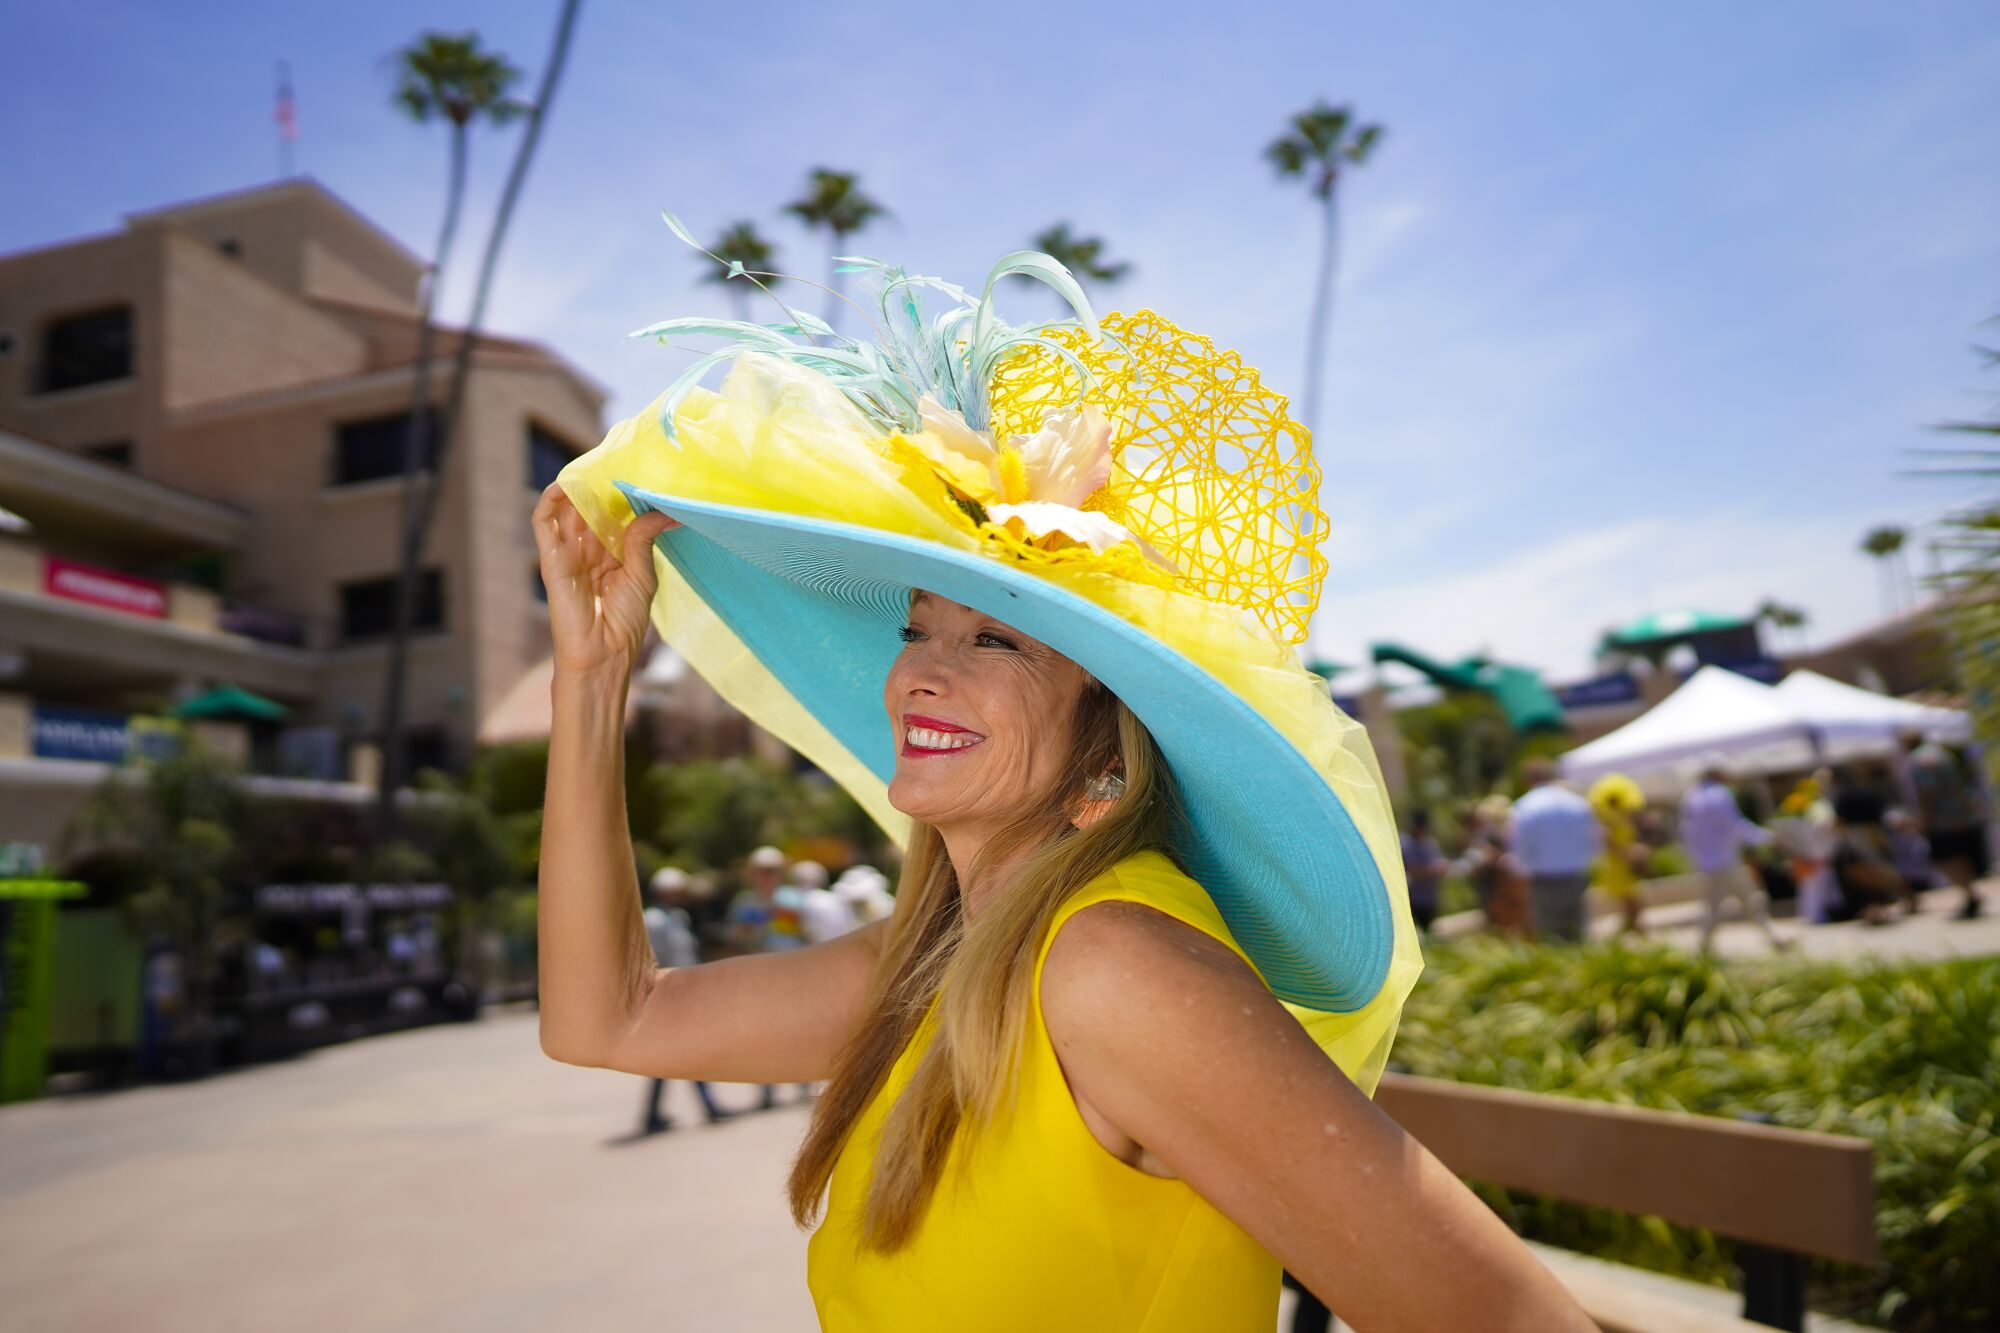 Susan Leonard from Solana Beachwas among the race fans taking part in the tradition of wearing hats on opening day.